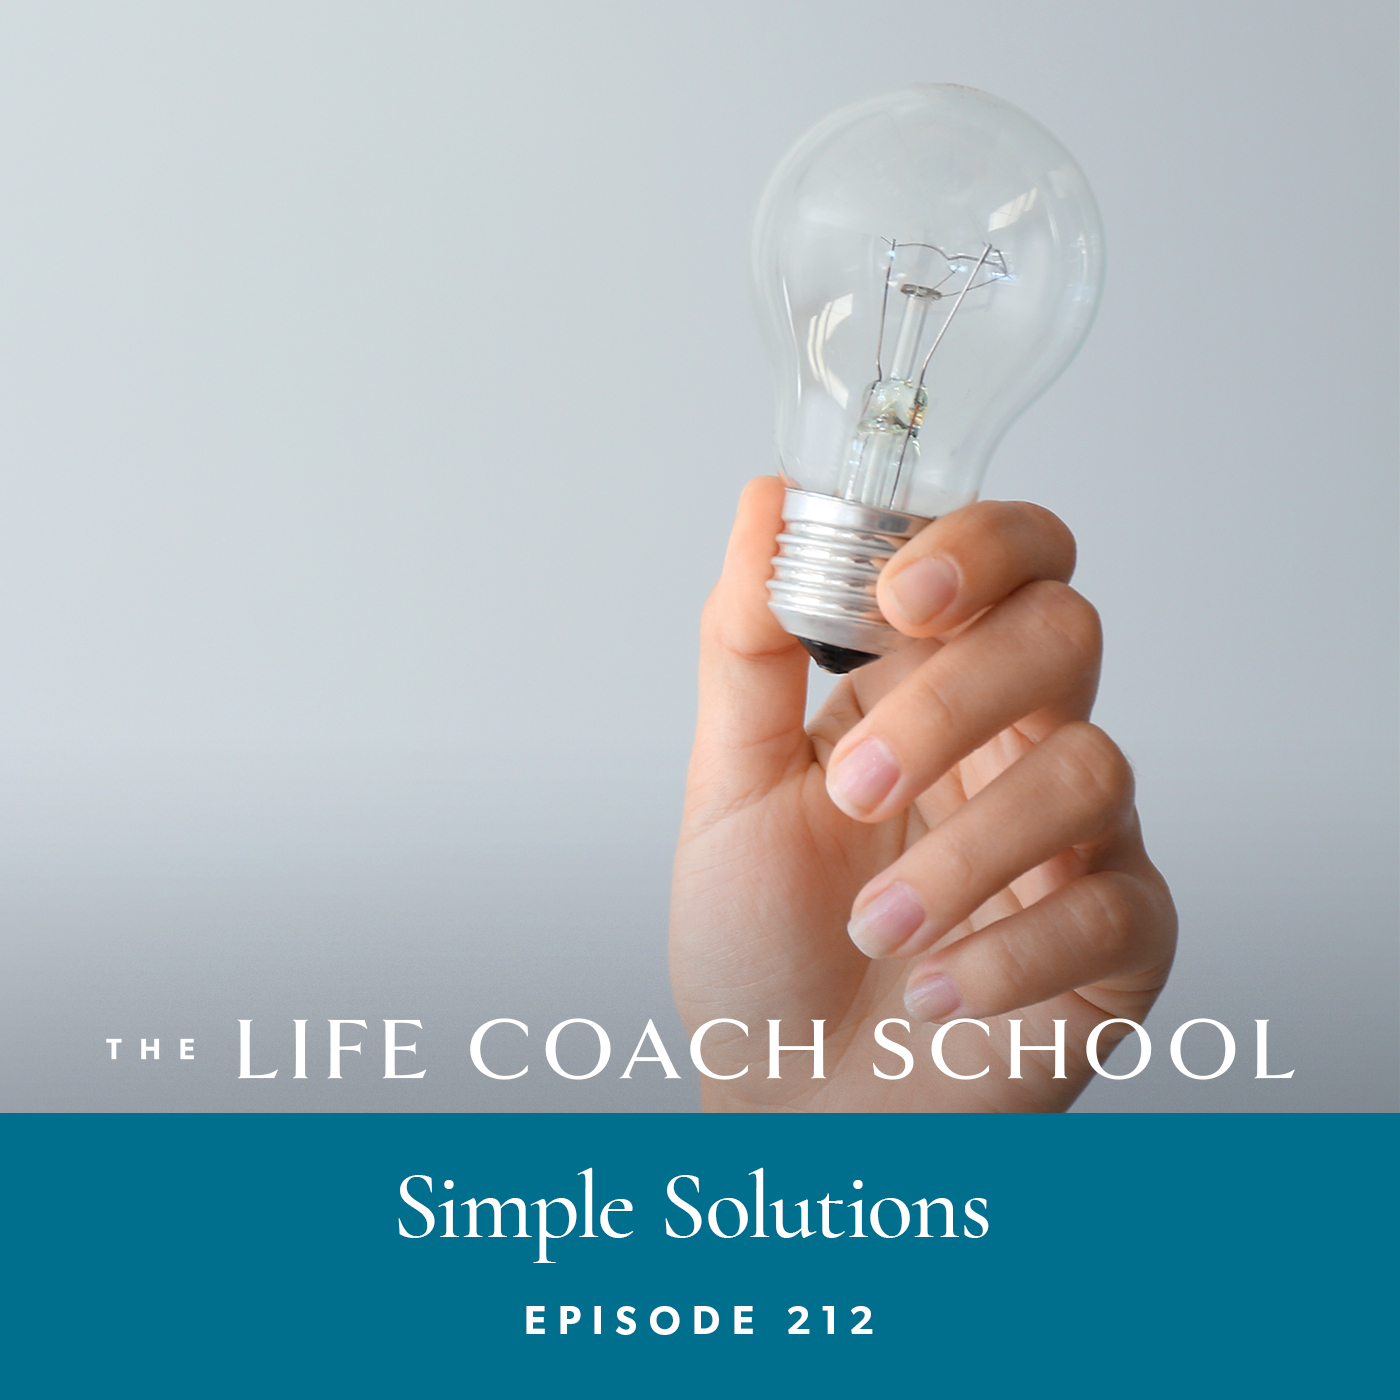 The Life Coach School Podcast with Brooke Castillo | Episode 212 | Simple Solutions